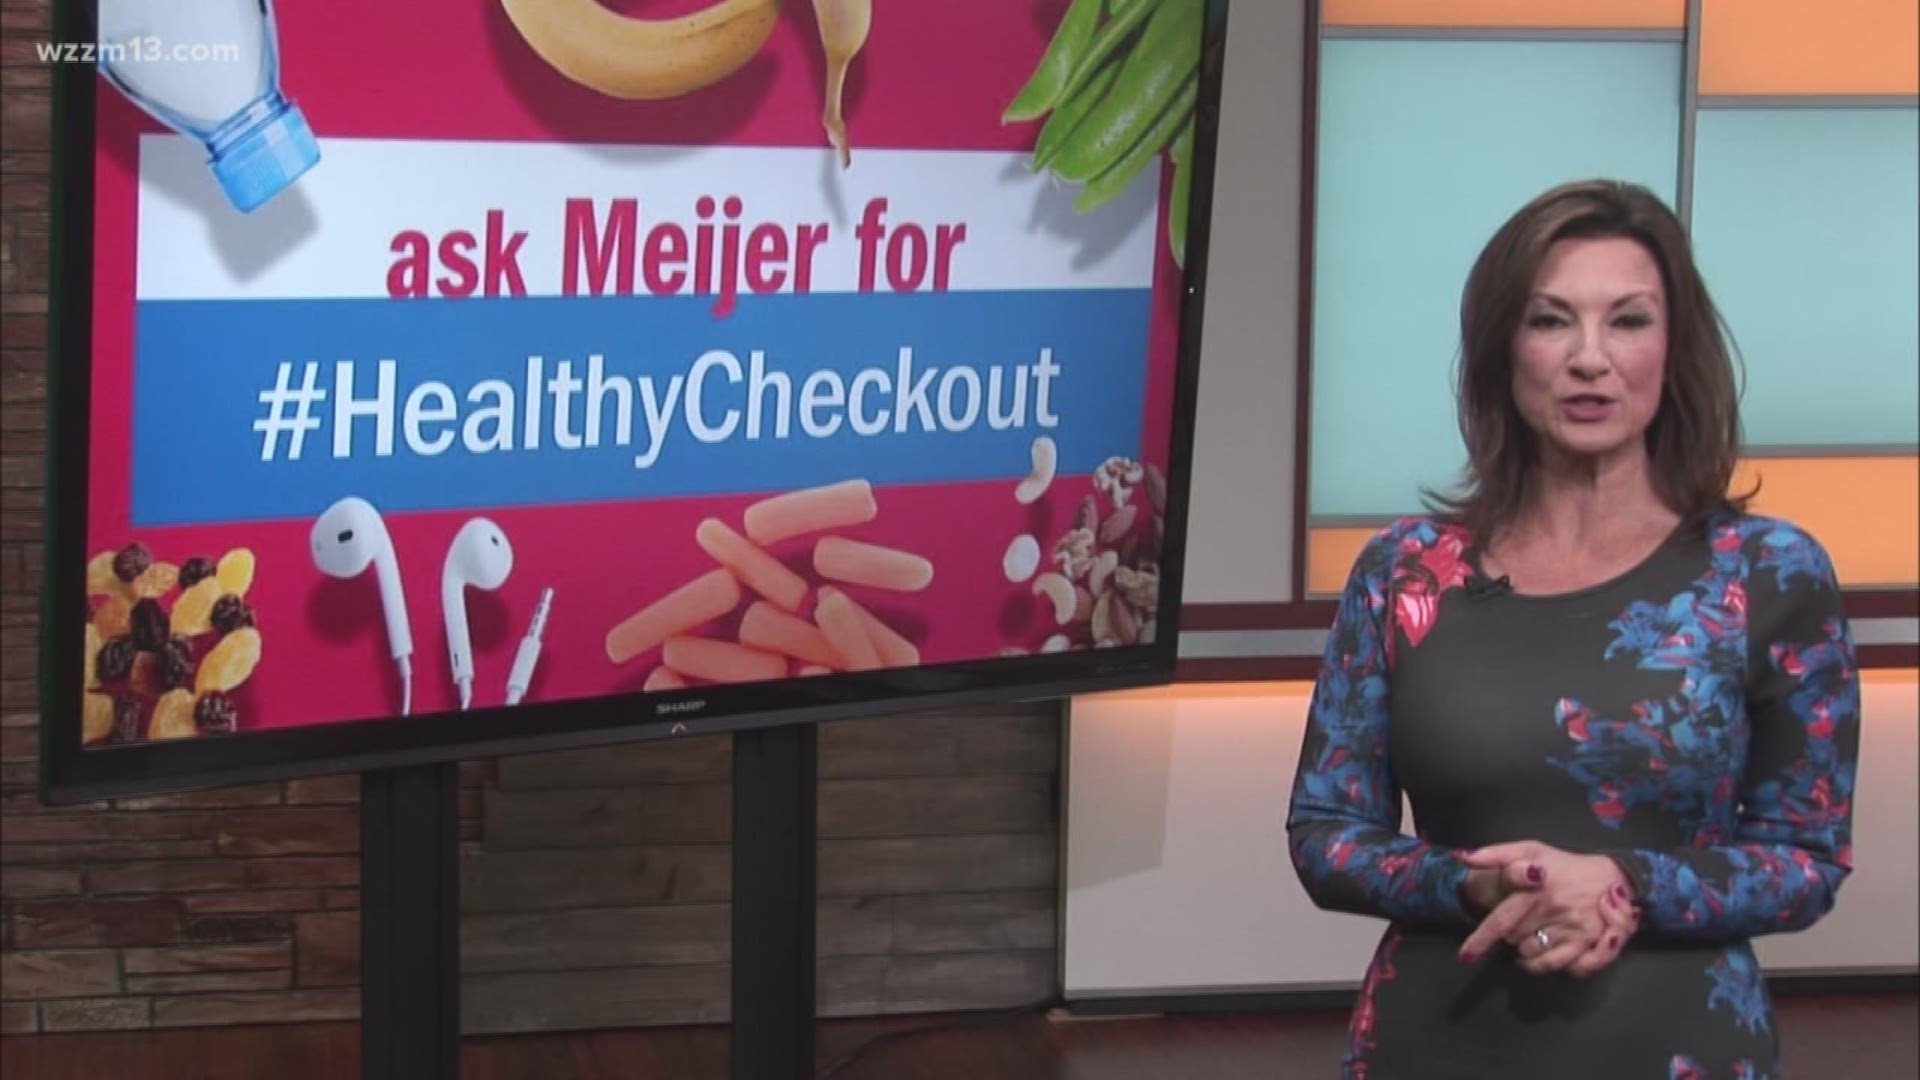 Grassroots group wants Meijer to offer healthier checkout options